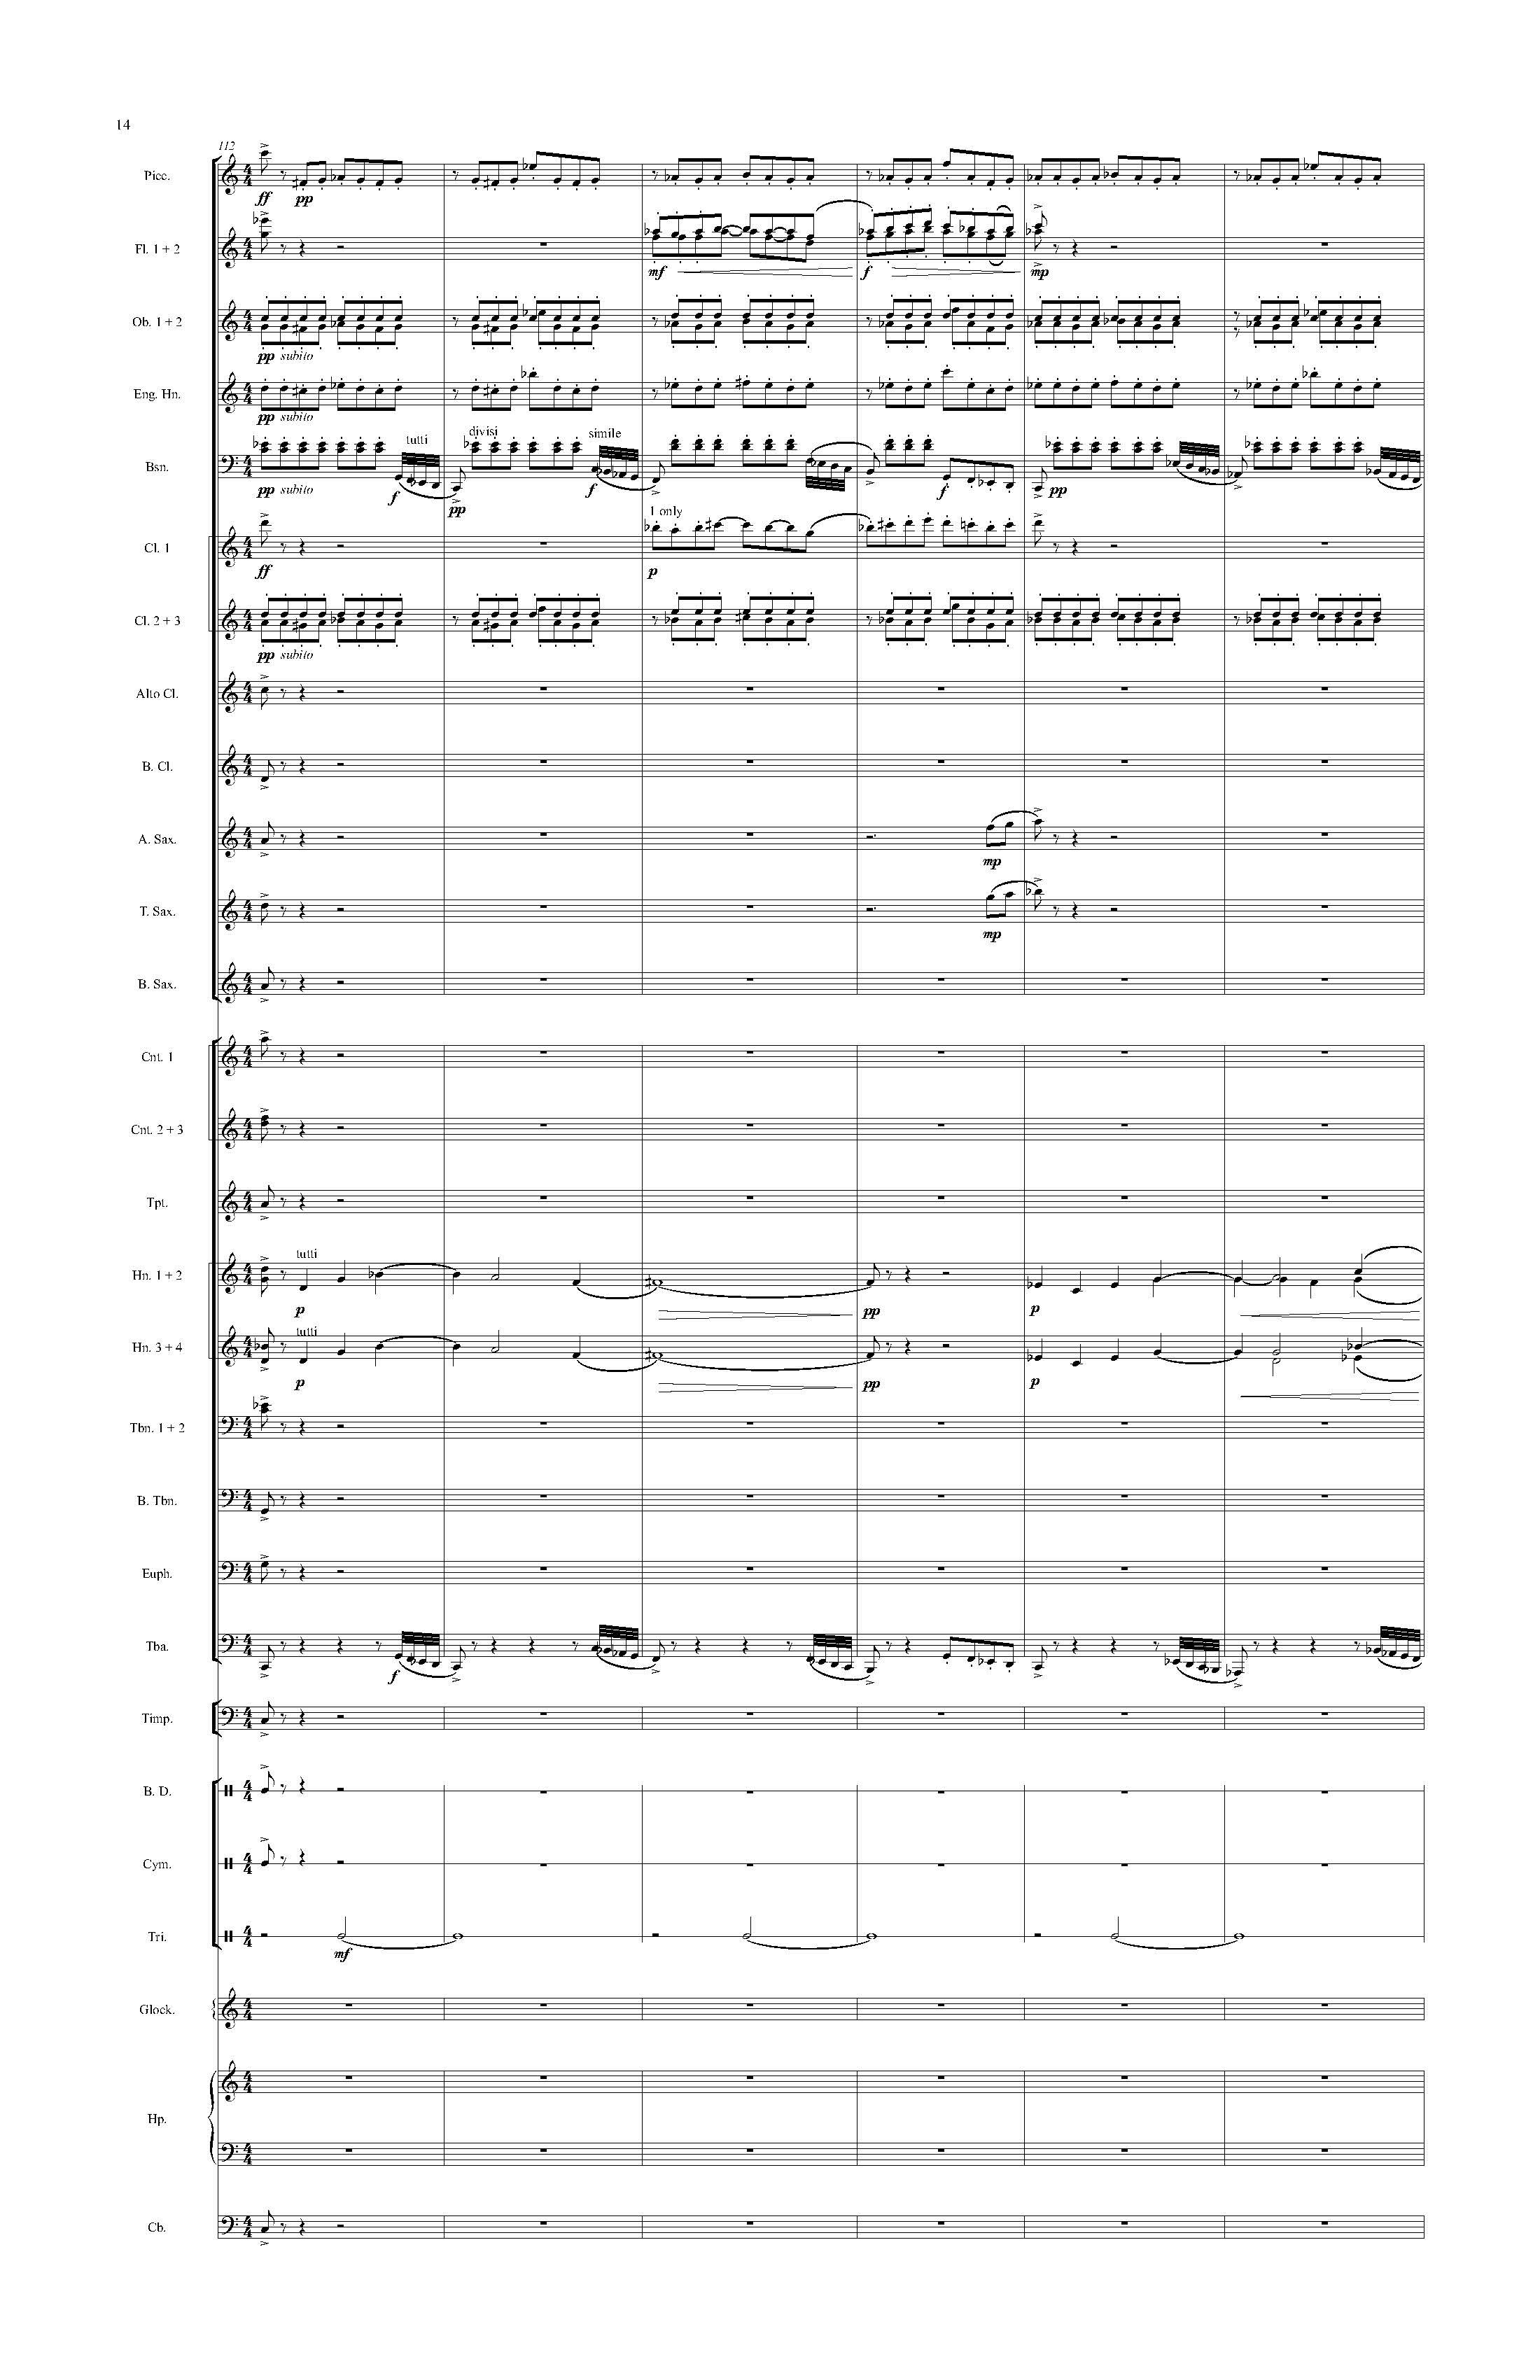 Psyche - Complete Score_Page_20.jpg